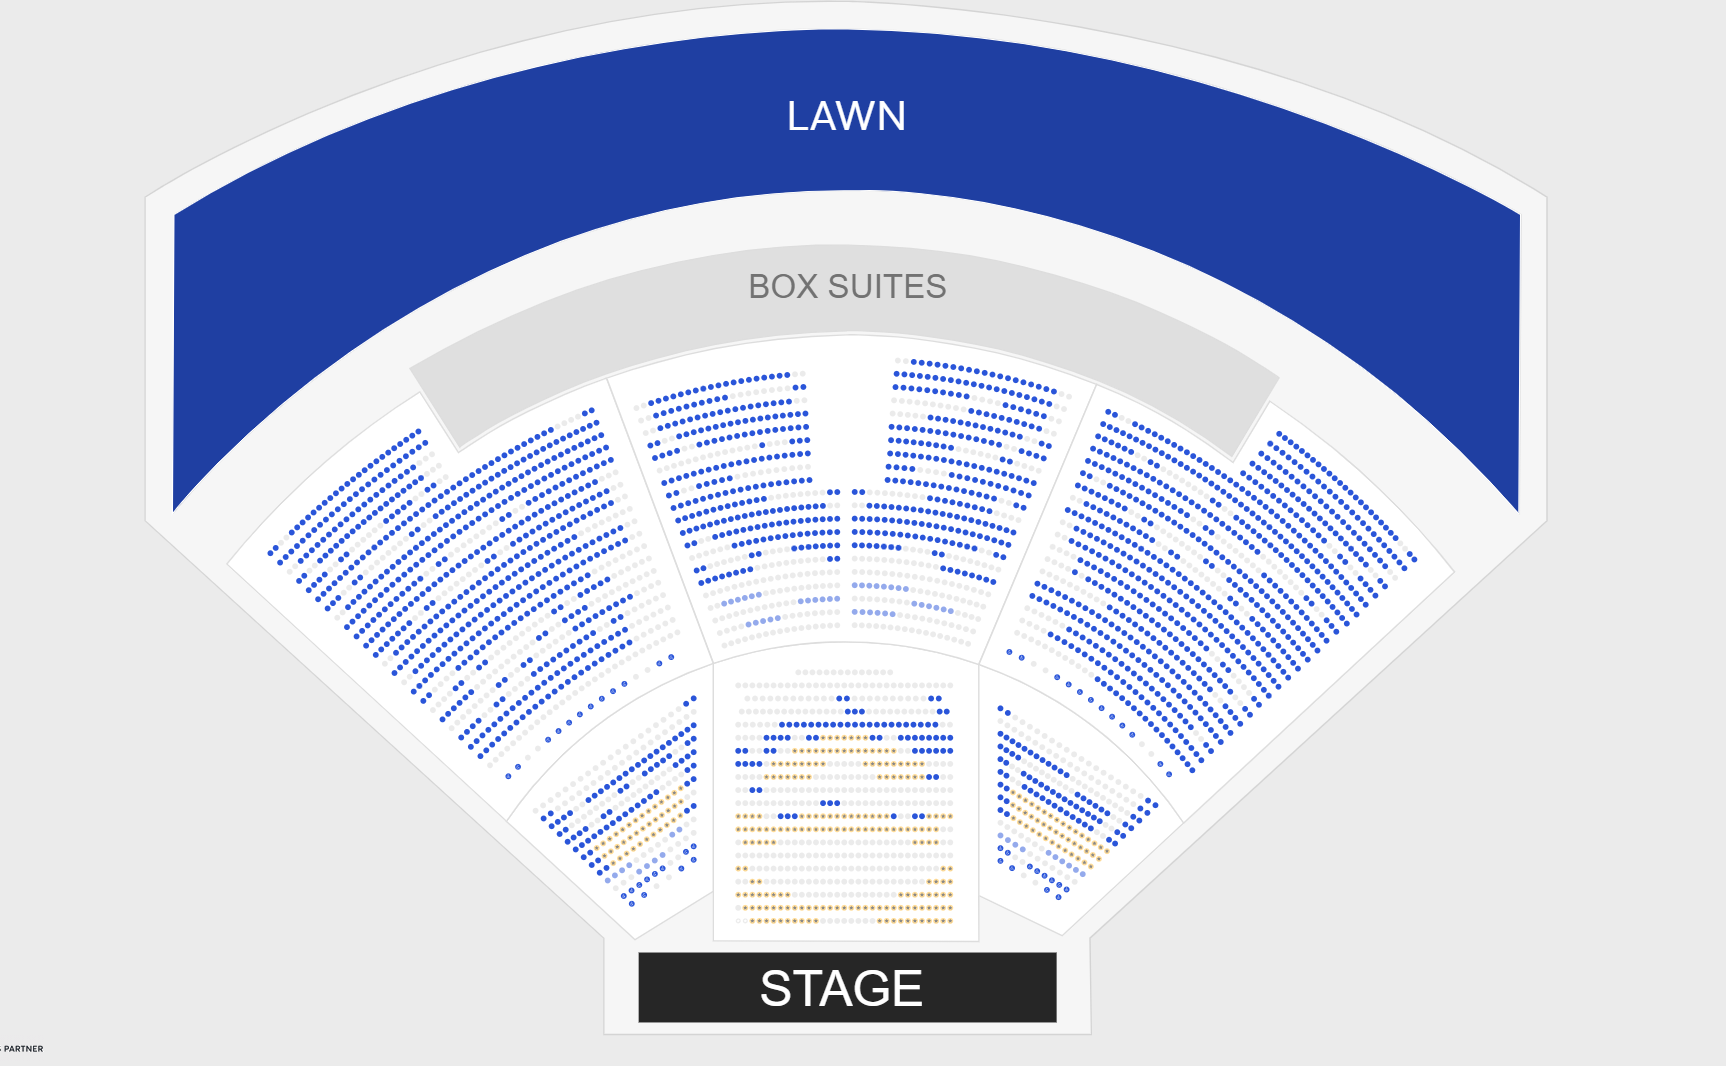 Lawn seats are as low $39.50 while VIP tickets close to the stage are $374.50